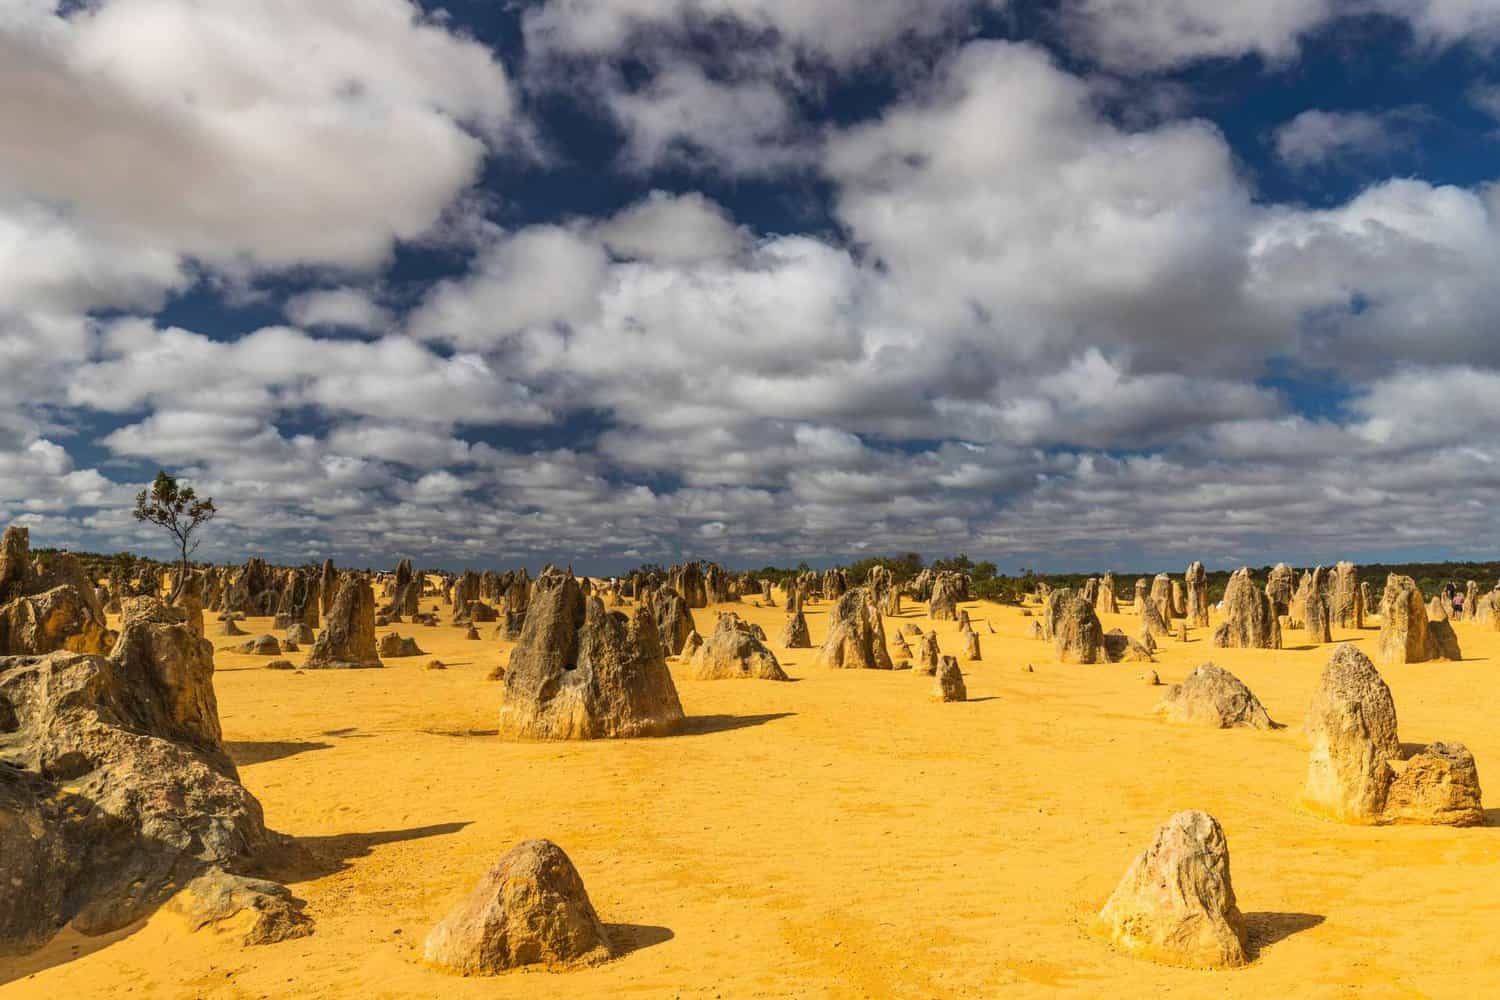 The Pinnacles Desert under a dramatic sky, part of Nambung National Park near Perth, with its ancient limestone formations rising from golden sands.